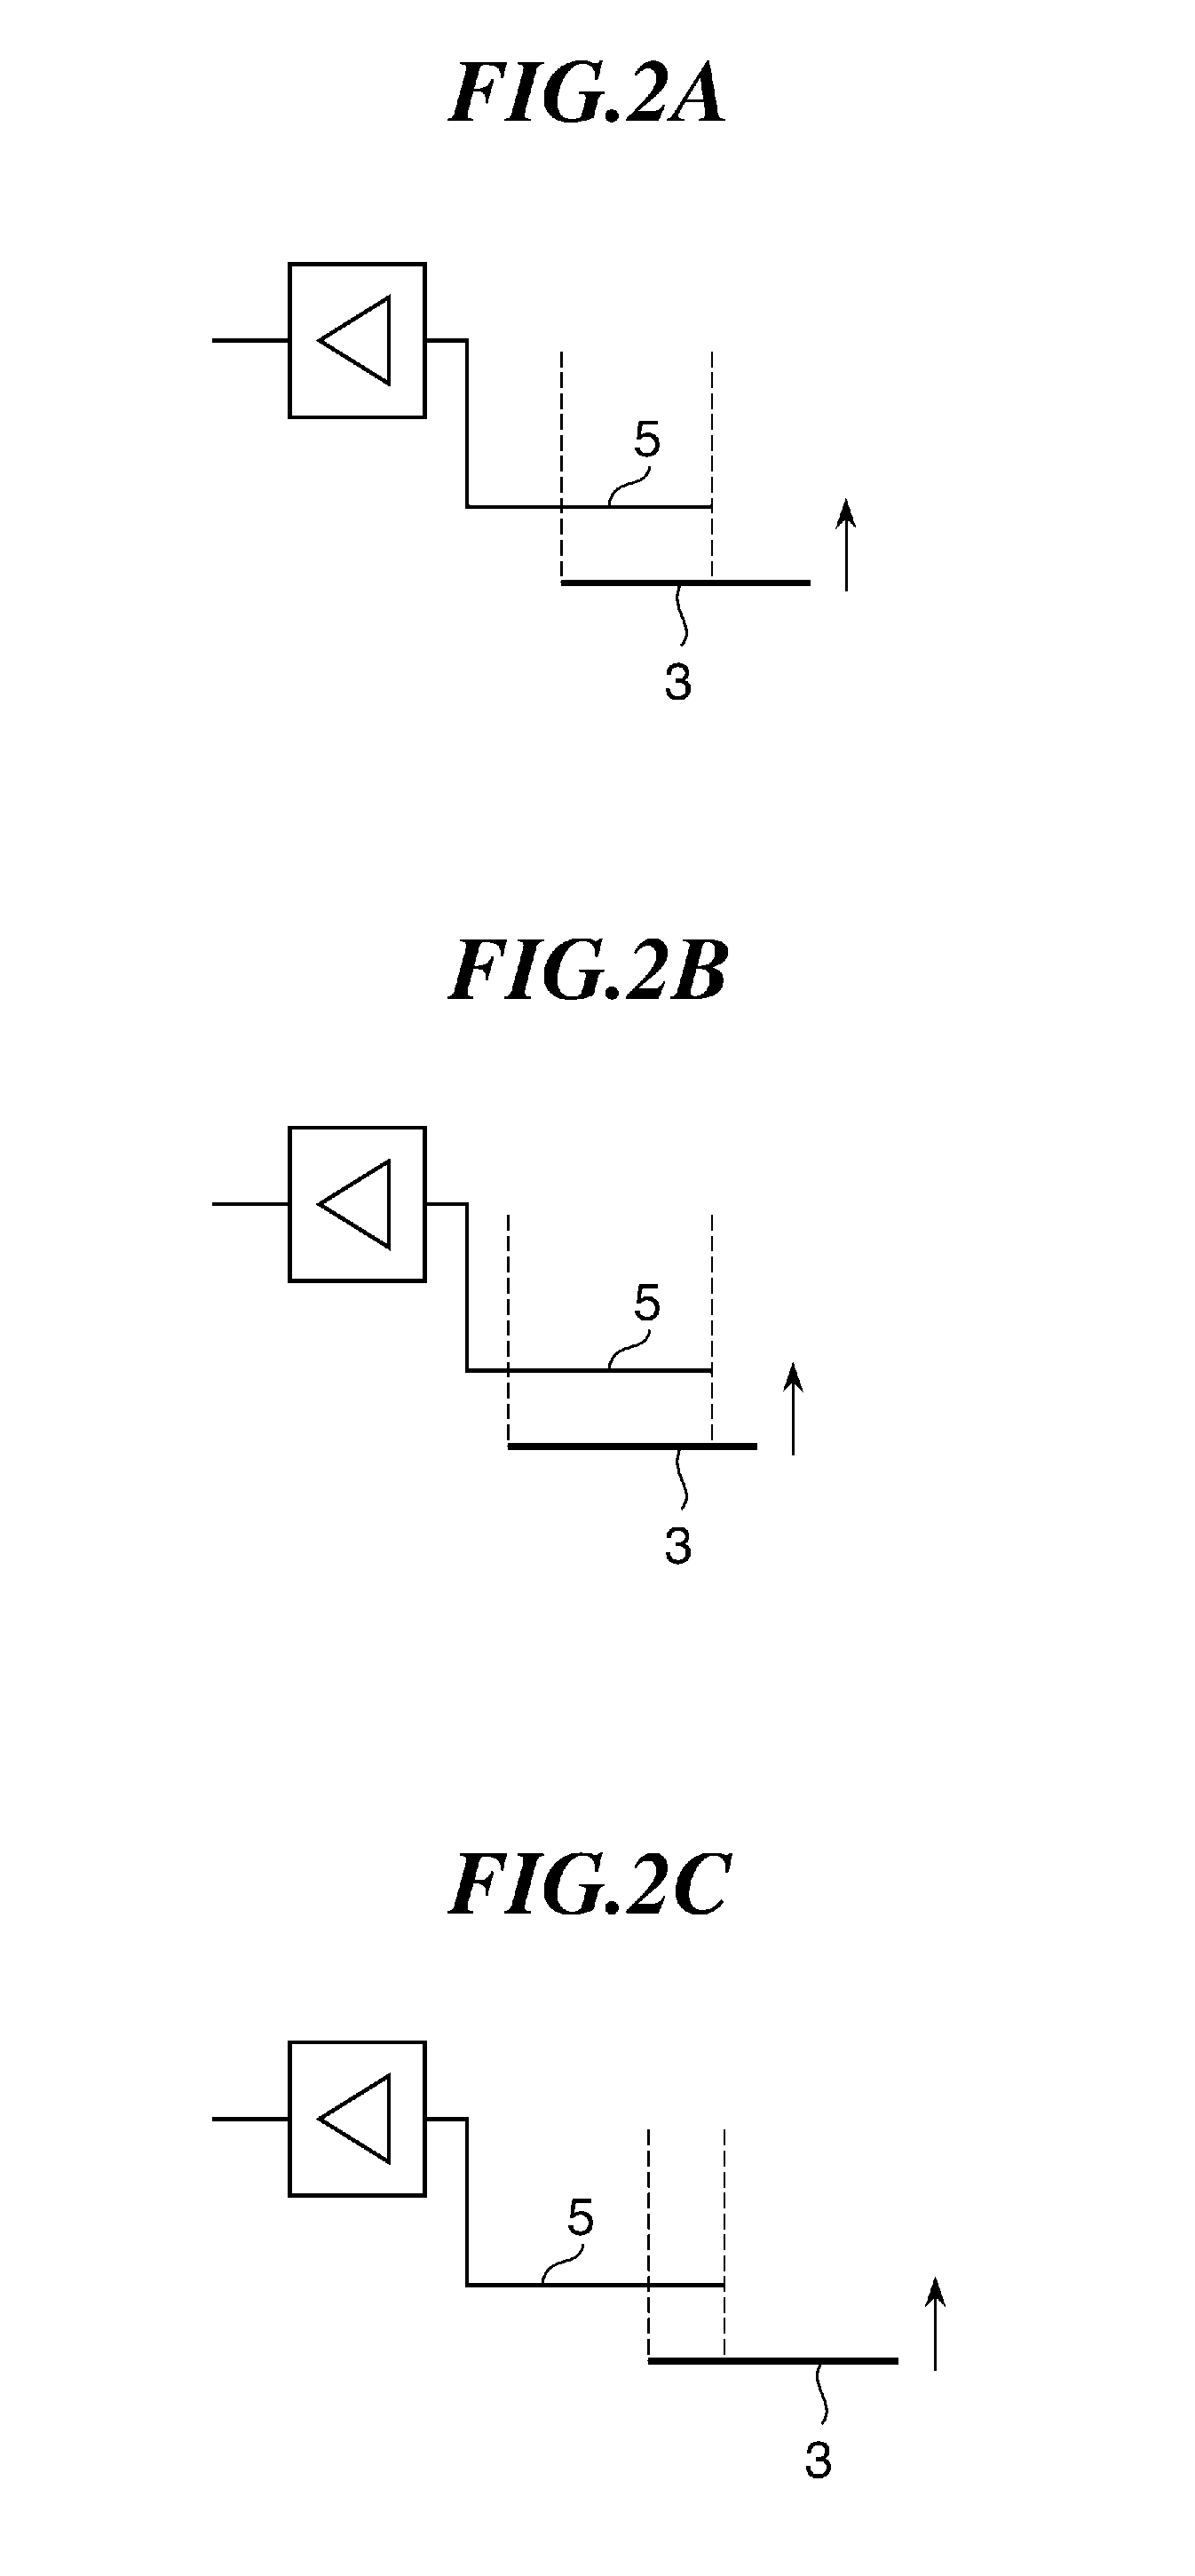 Image forming apparatus that detects image shift in the main scanning direction without wasting toner